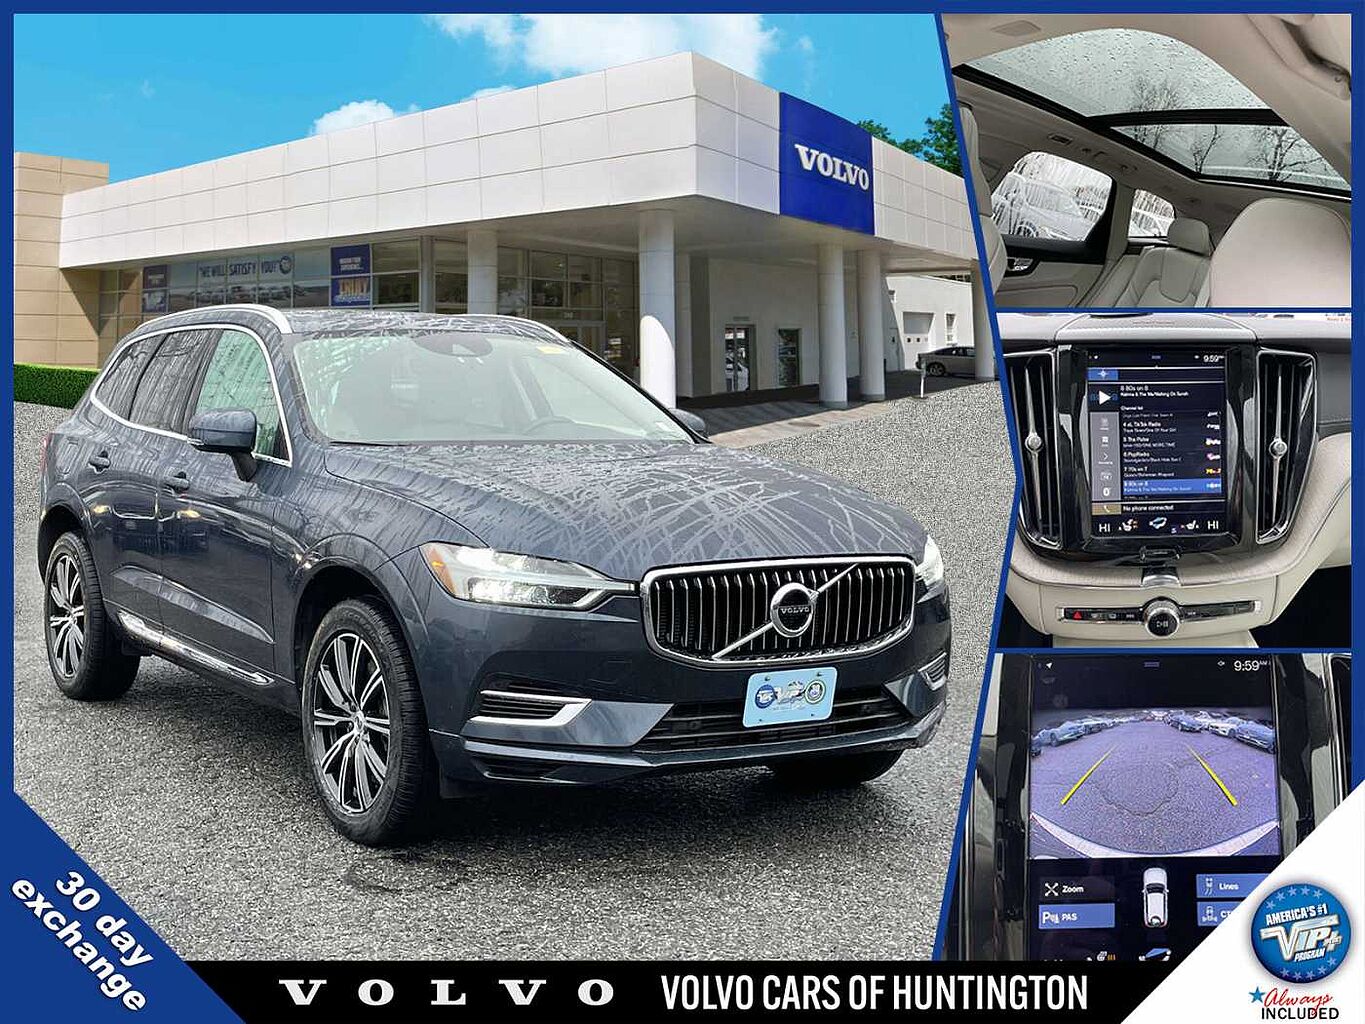 Pre-owned Volvo XC60 Cars for Sale on Certified by Volvo